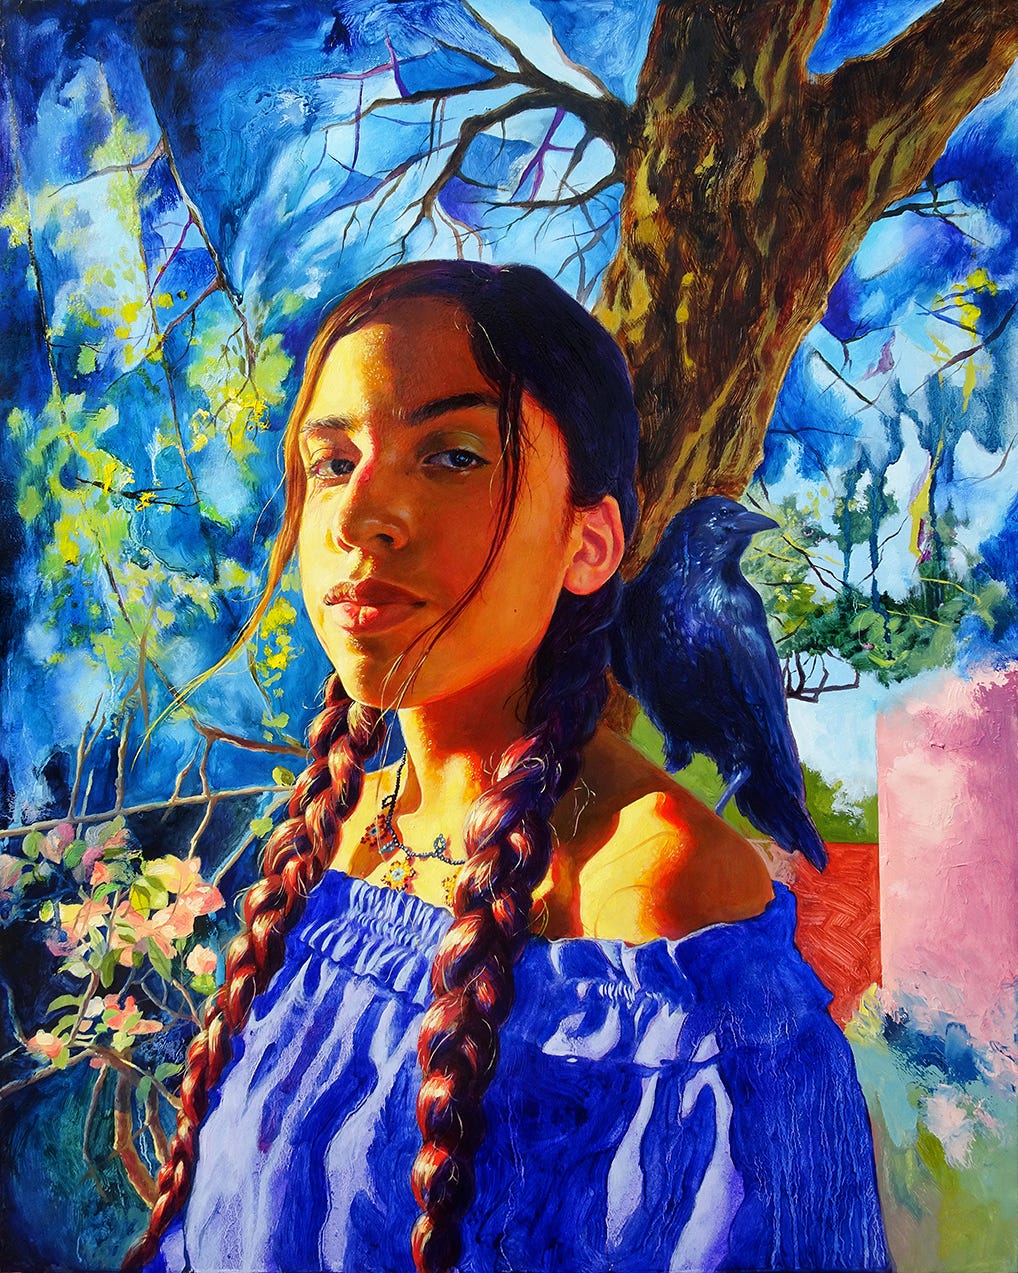 Painting of a young woman with braids, wearing a blue blouse, against a blue background with flowers and a tree